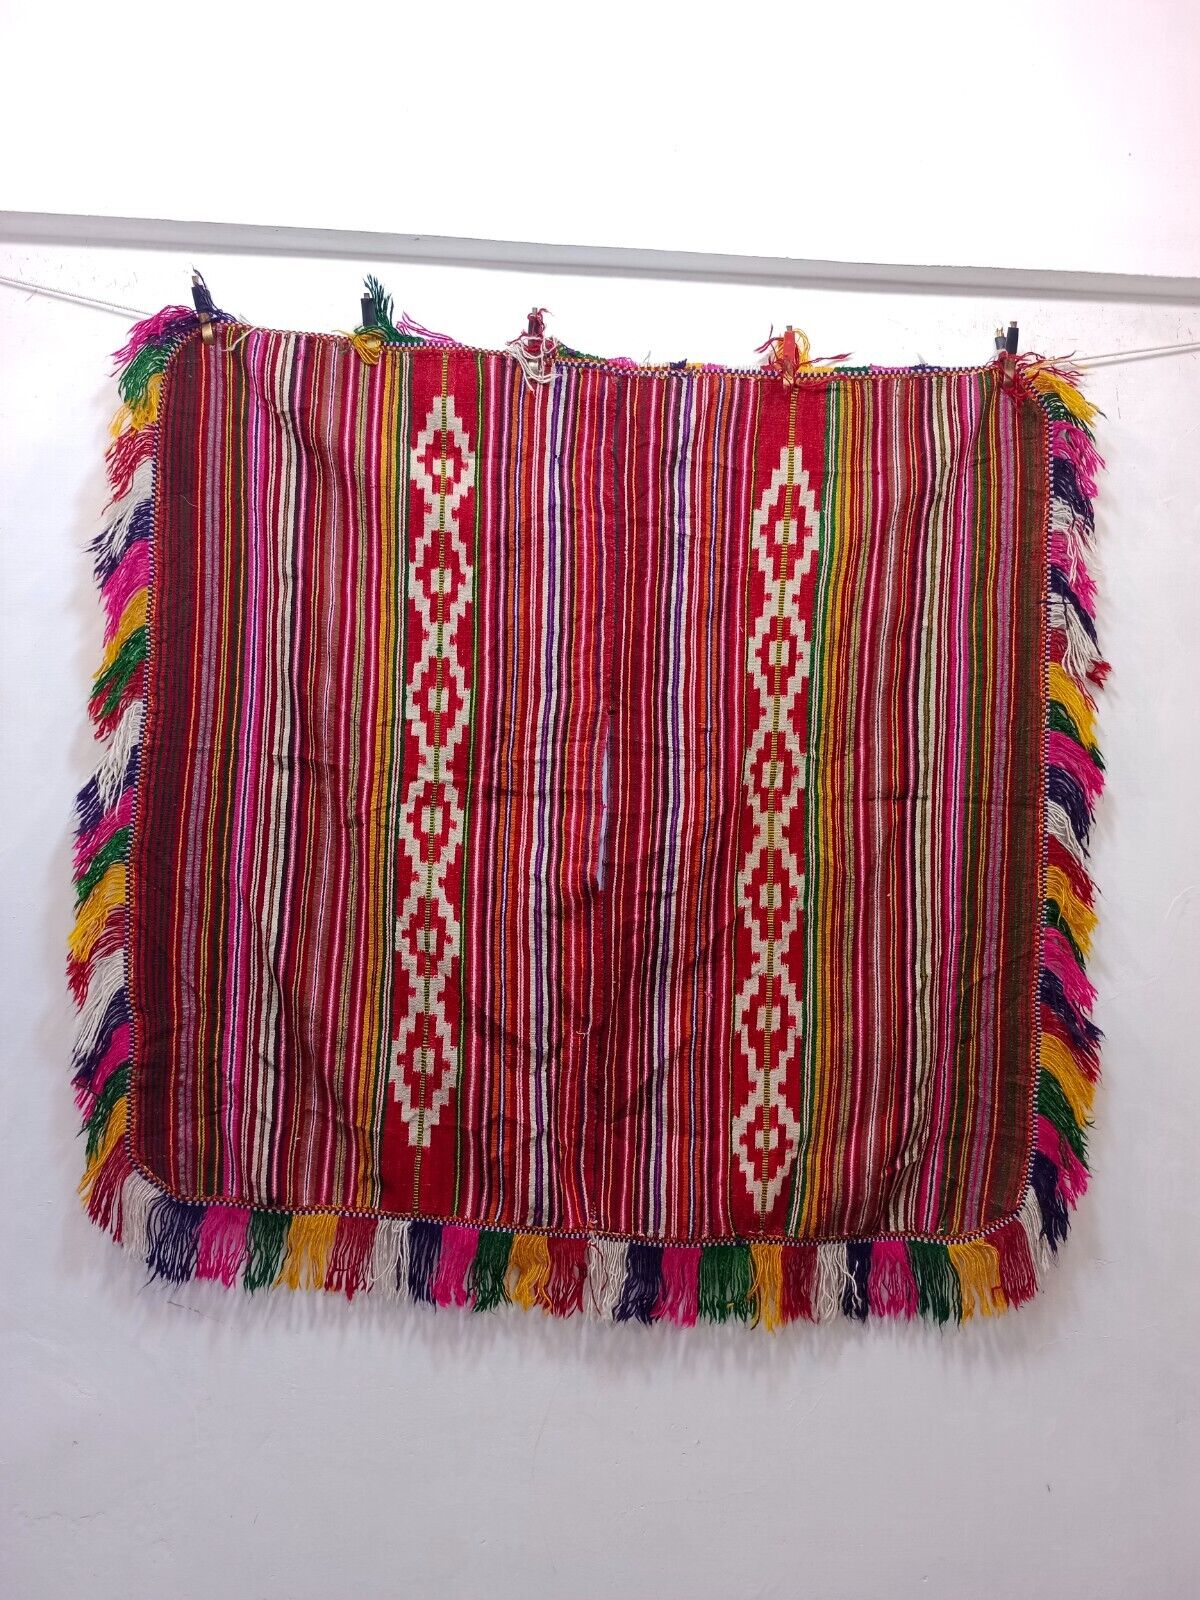 Vintage Gorgeous Hand Woven Peruvian Or Bolivian Wool Textile Fringed 109×115 Cm